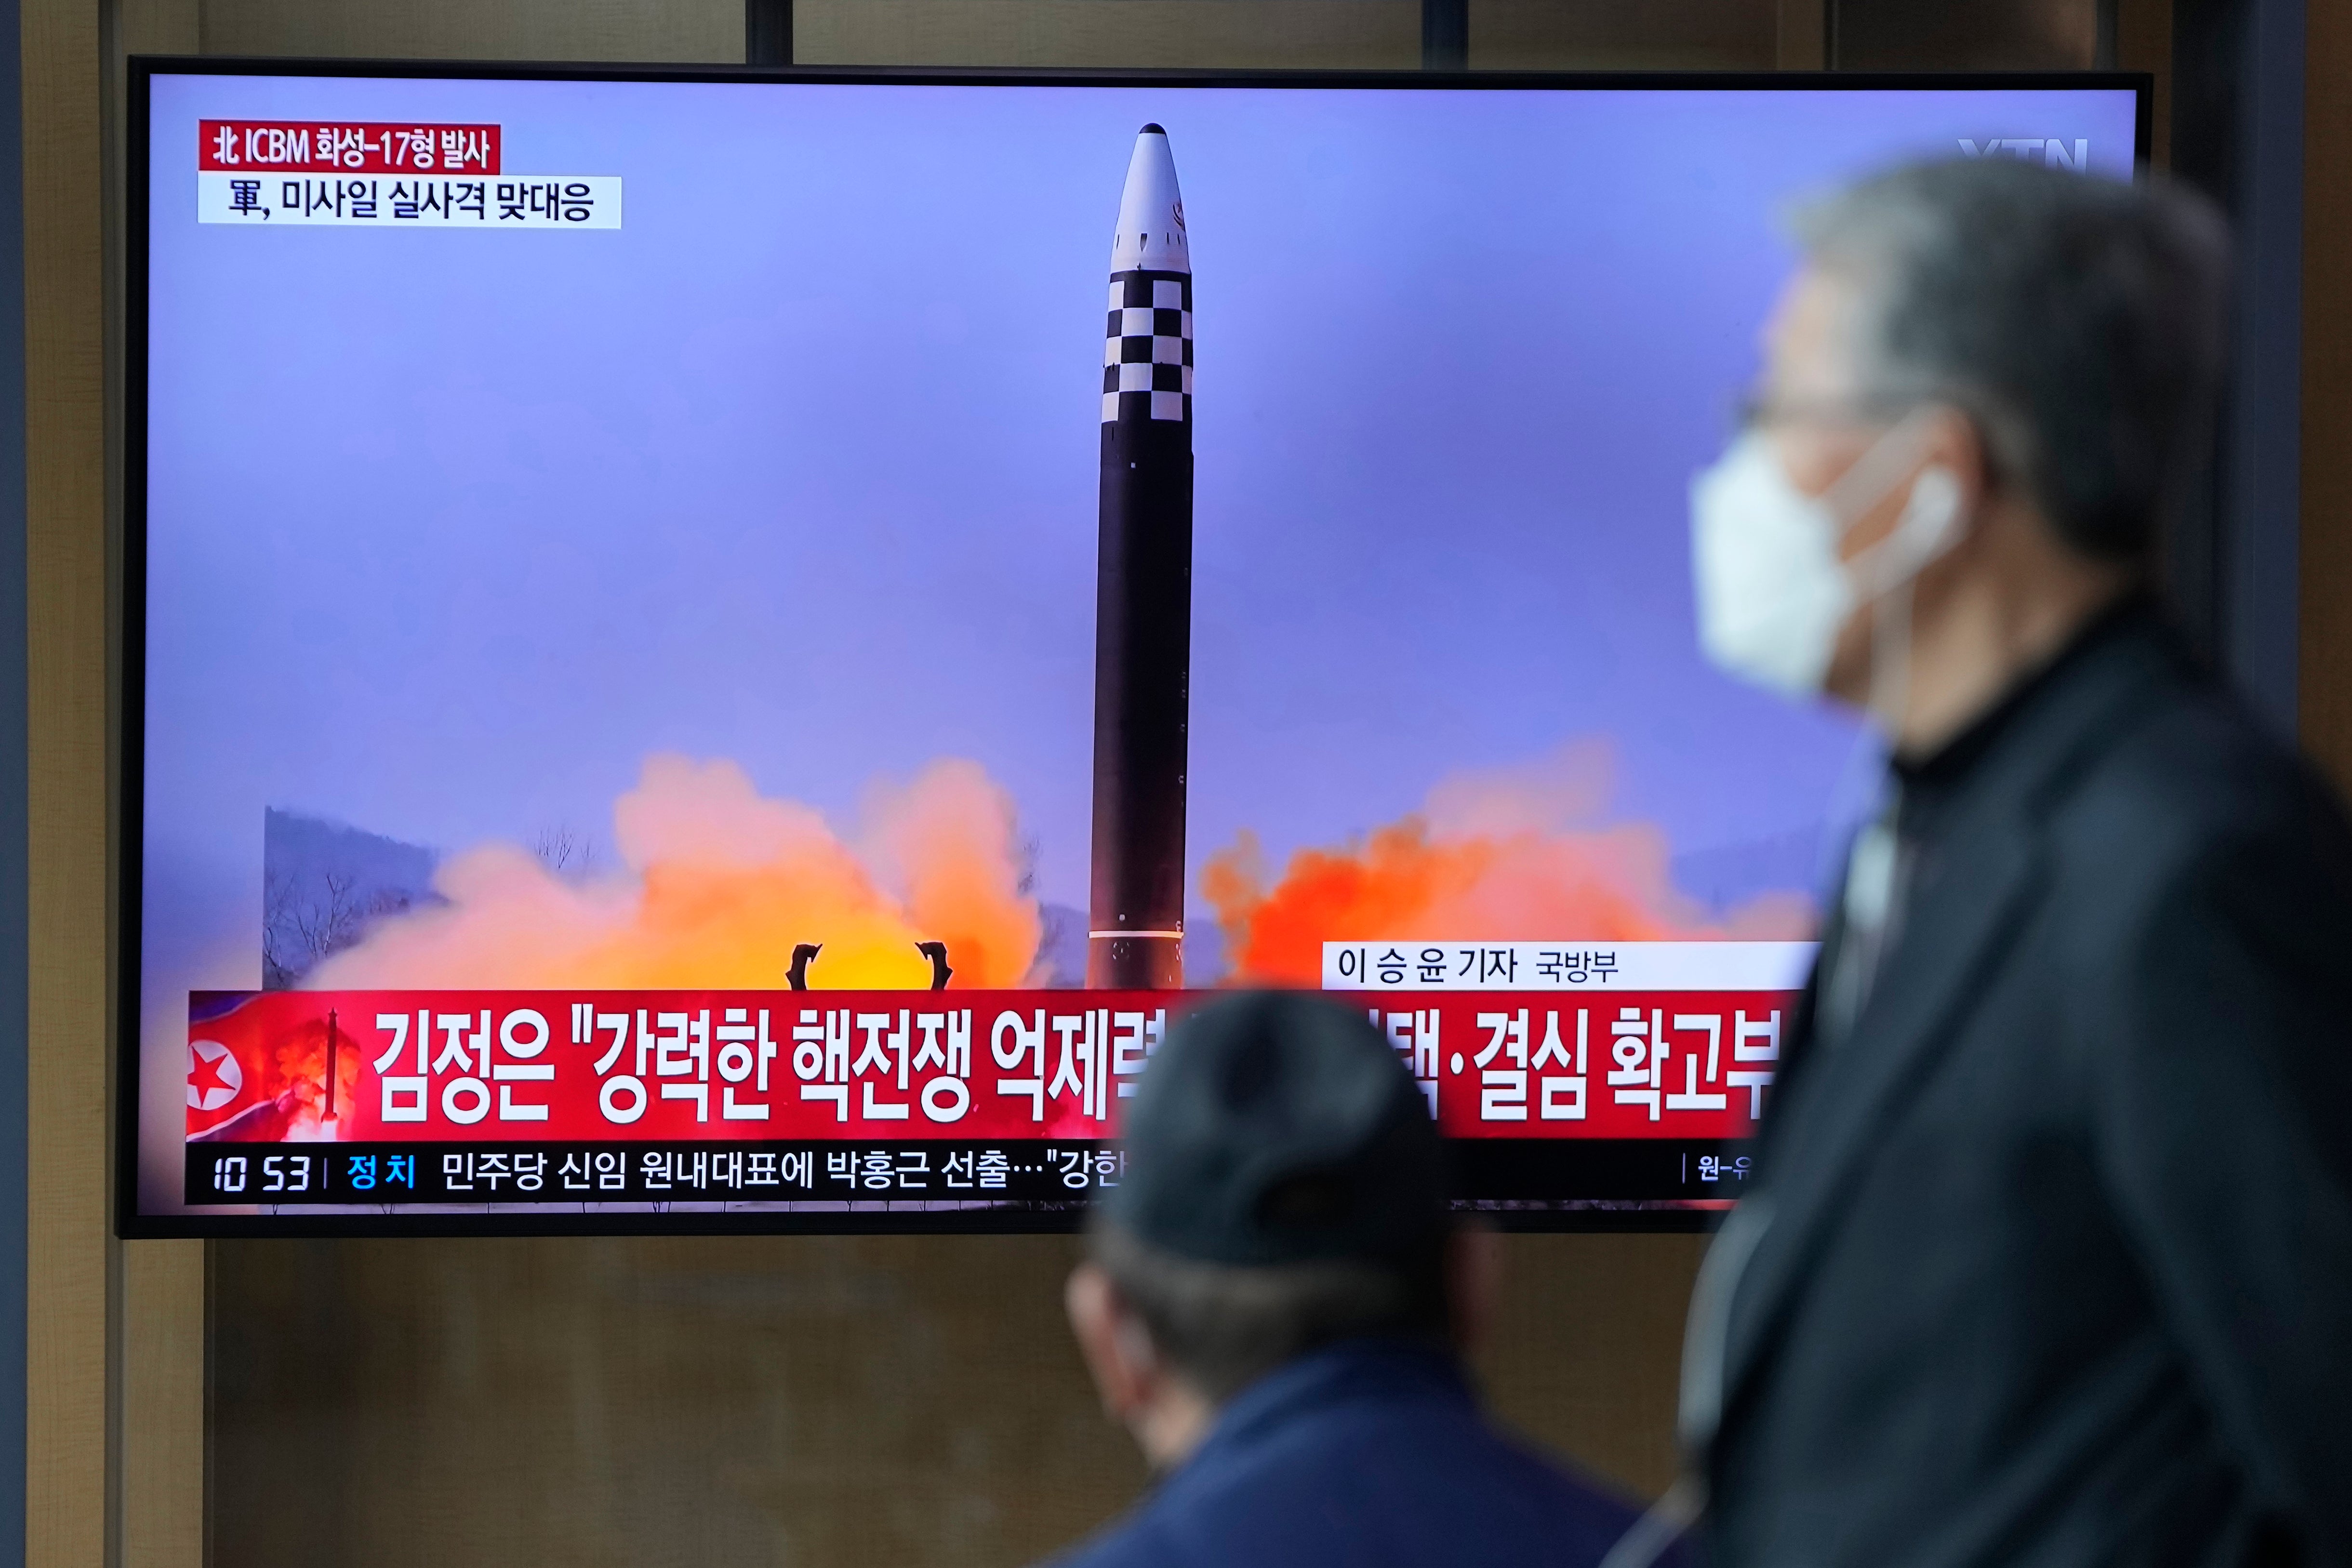 A news program reporting about North Korea's missile launch